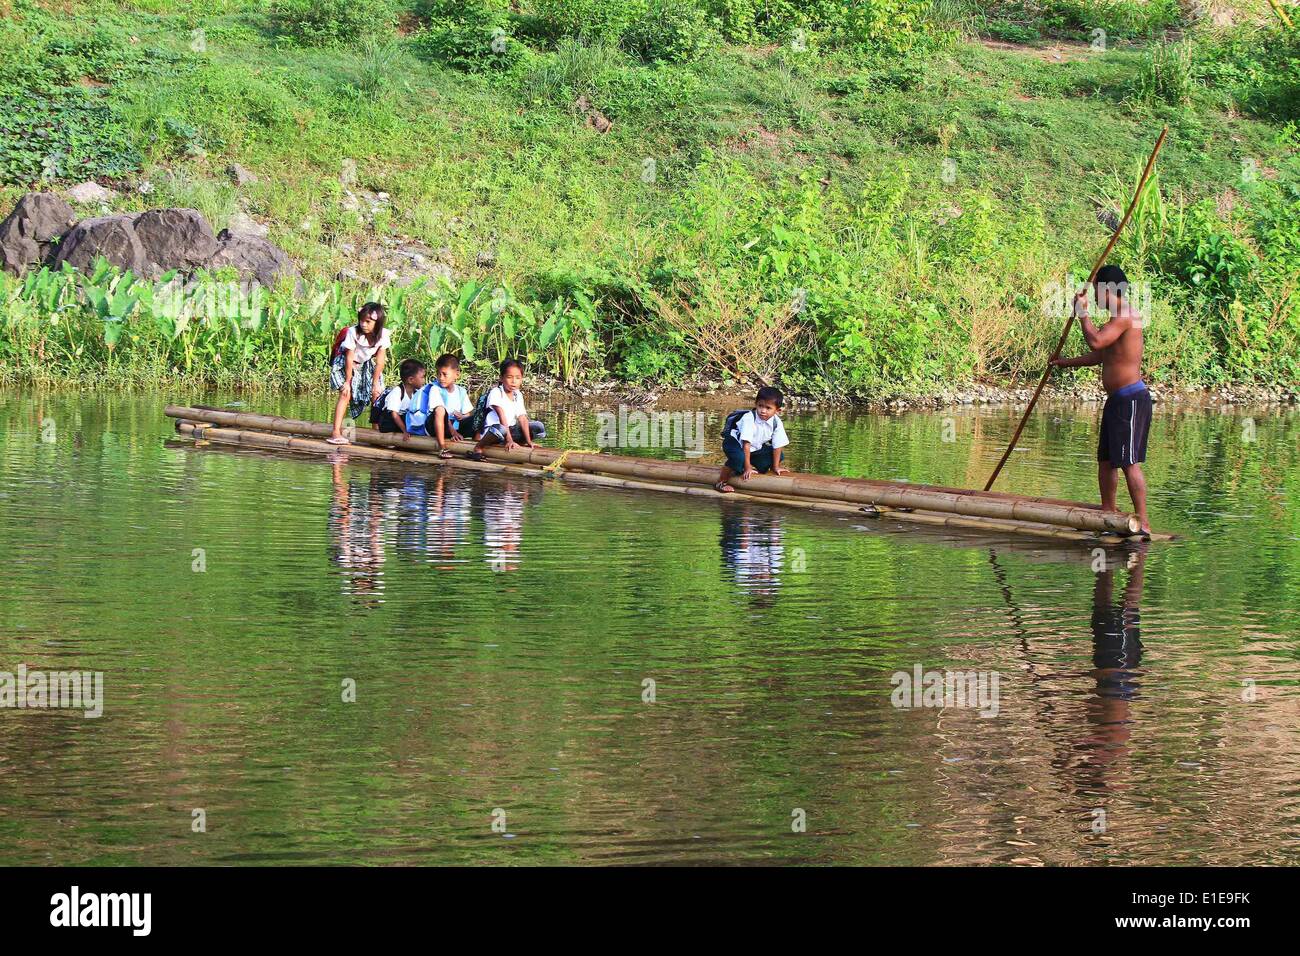 Rizal Province, Philippines. 2nd June, 2014. Students ride a bamboo raft on their way to a remote elementary school in Rizal Province, the Philippines, June 2, 2014. More than 23 million students returned to school on Monday for the first day of classes for the school year of 2014-2015. © Rouelle Umali/Xinhua/Alamy Live News Stock Photo